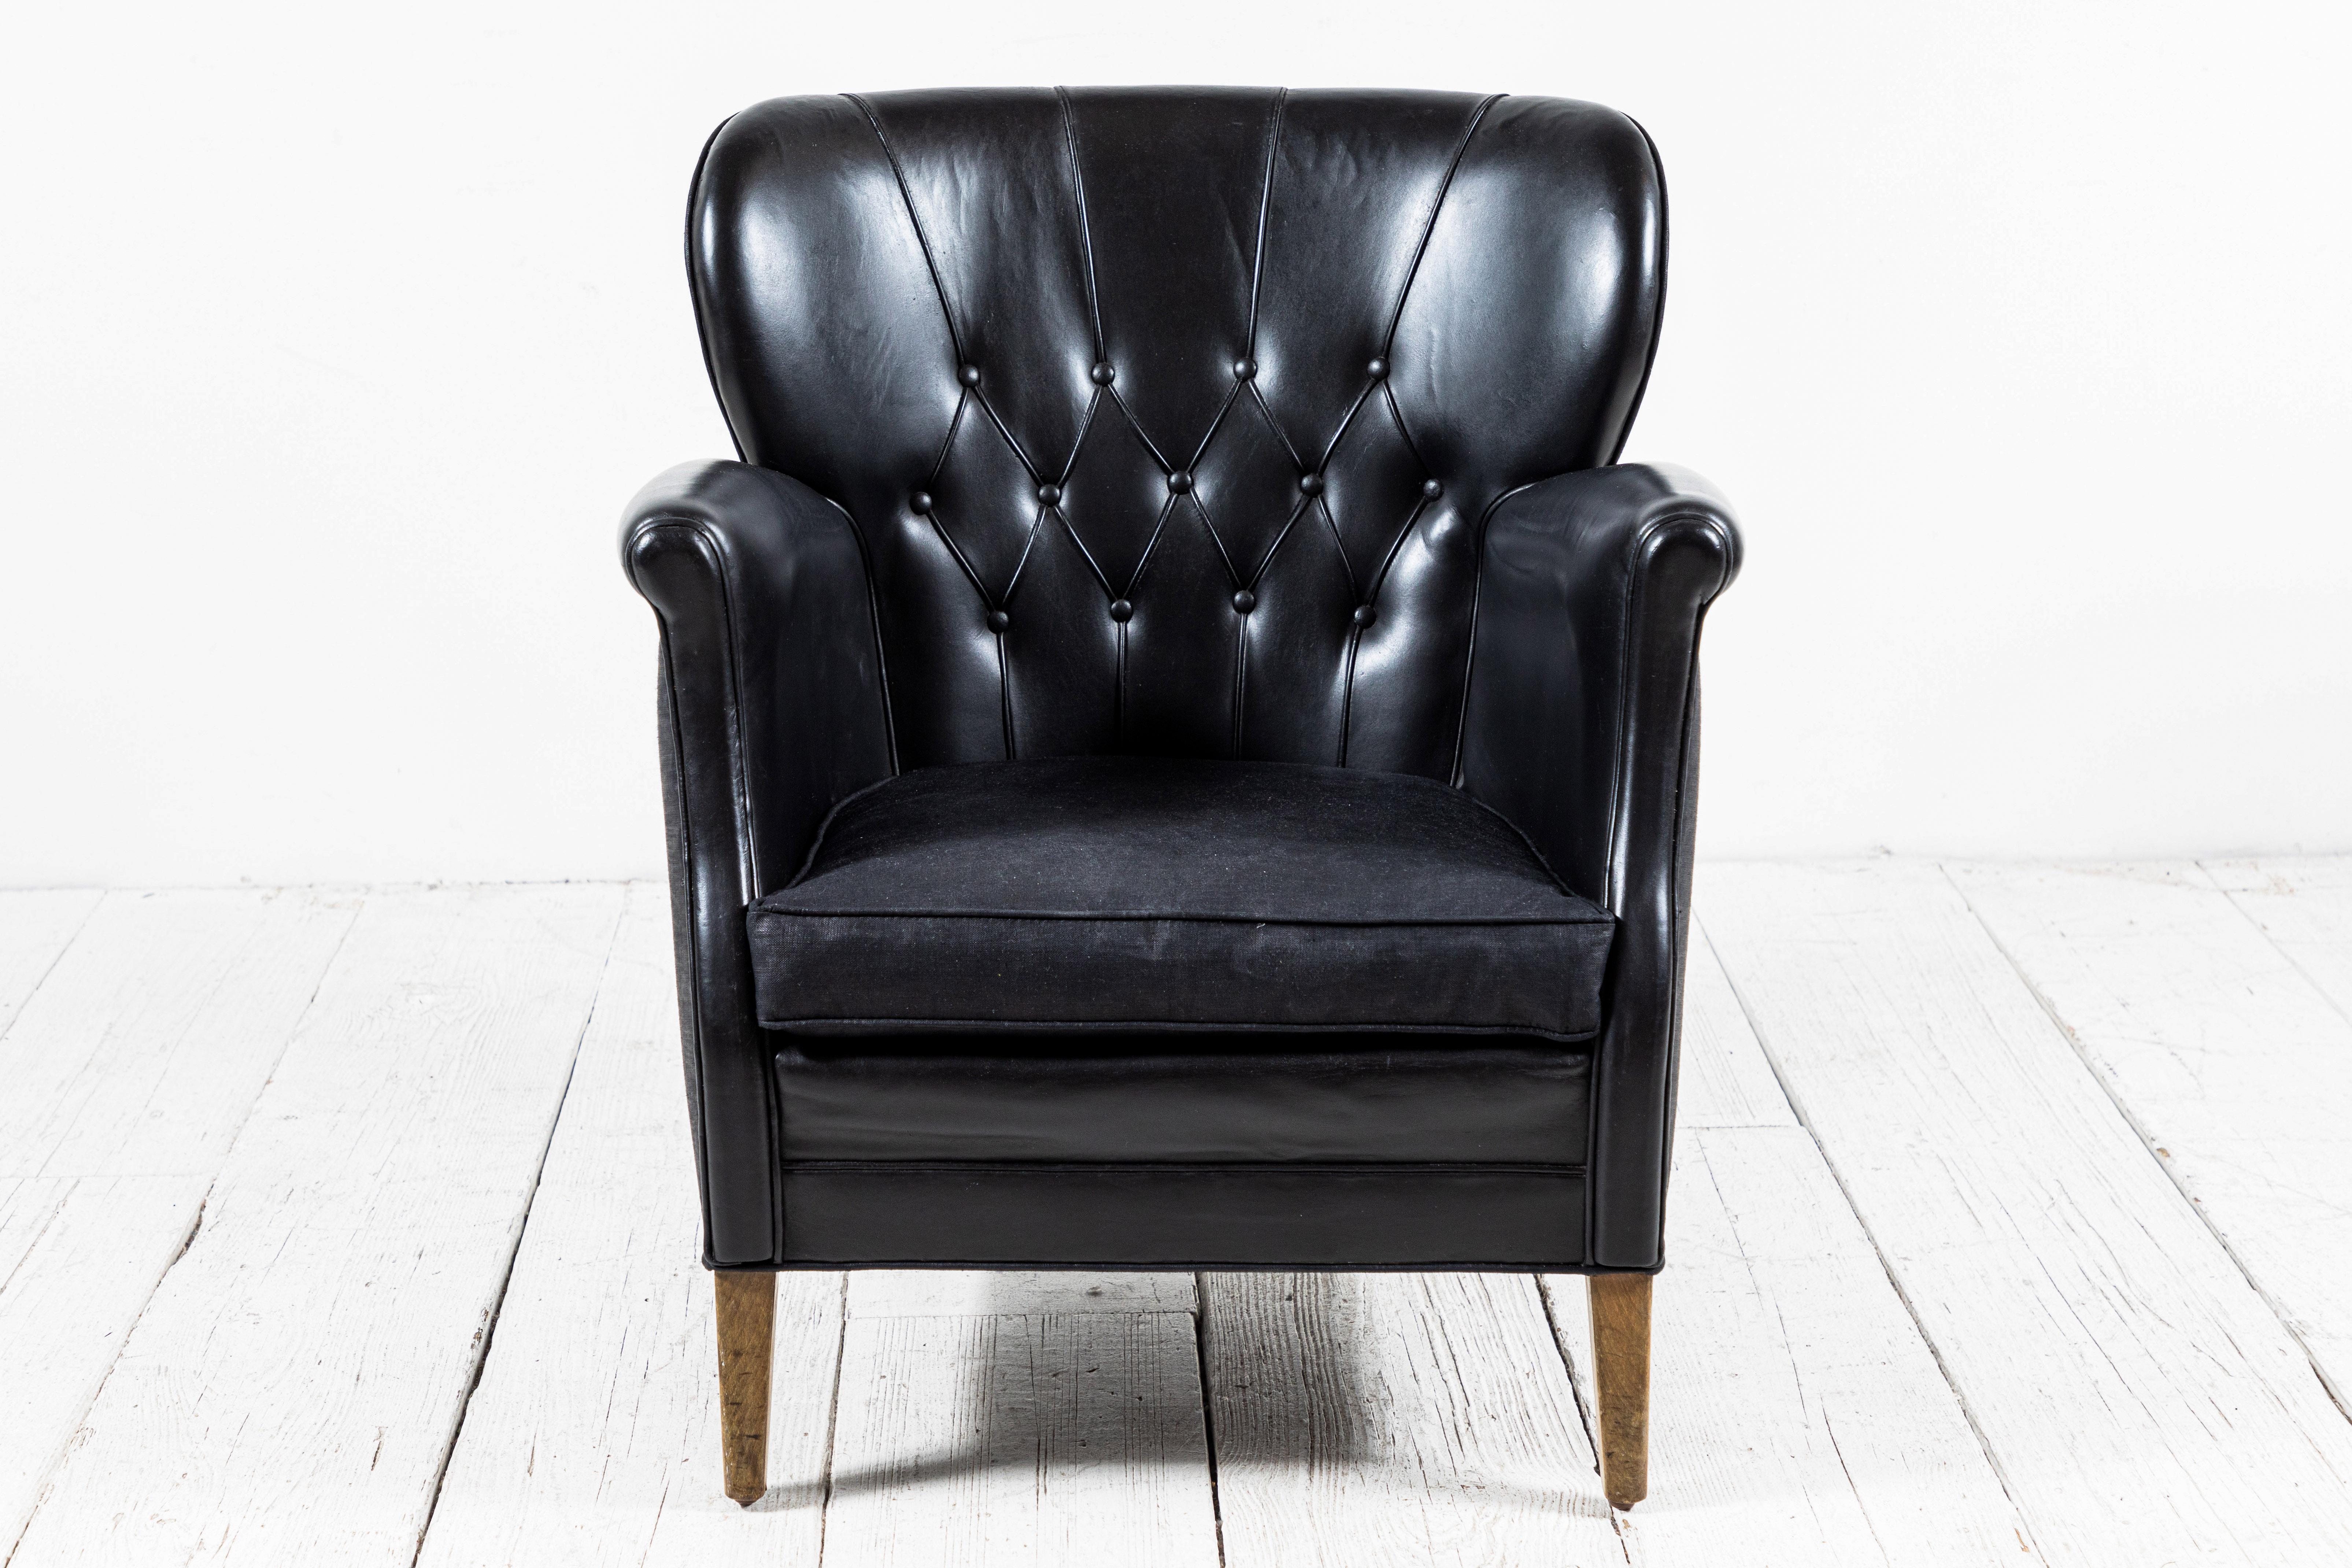 Mid-20th Century Danish Style Black Leather Tufted Pair of Chairs